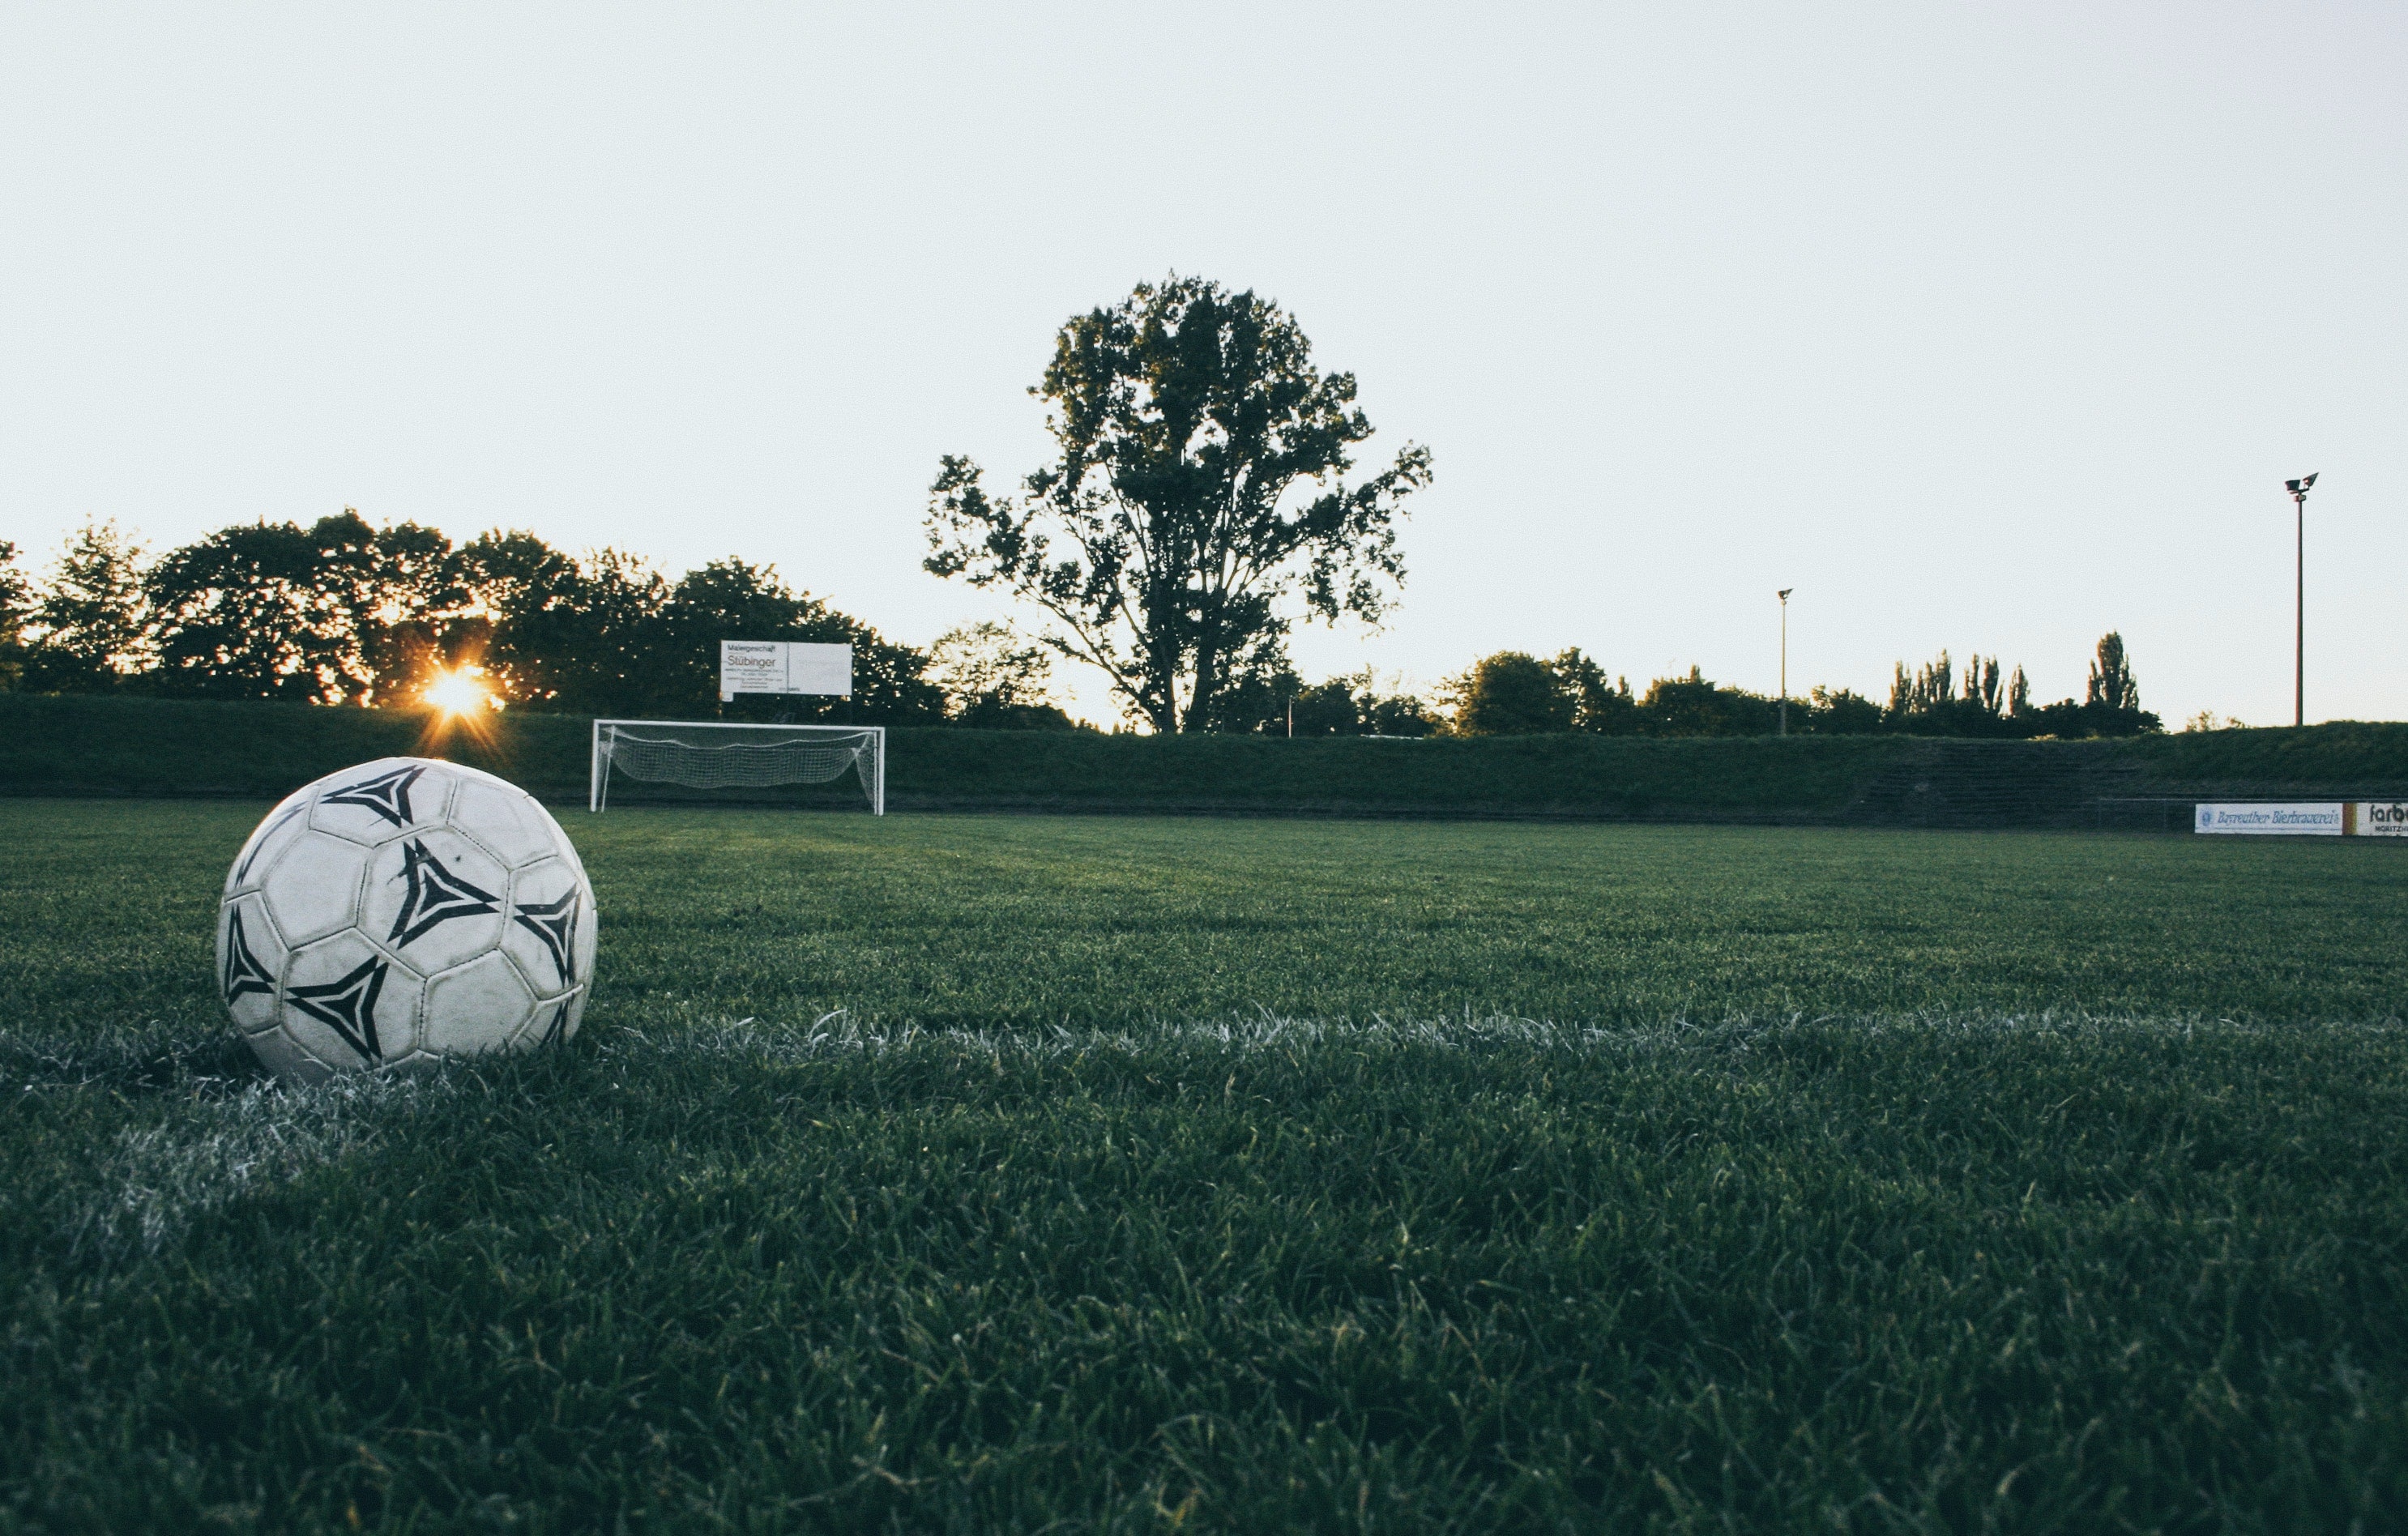 Soccer ball on a field with goal